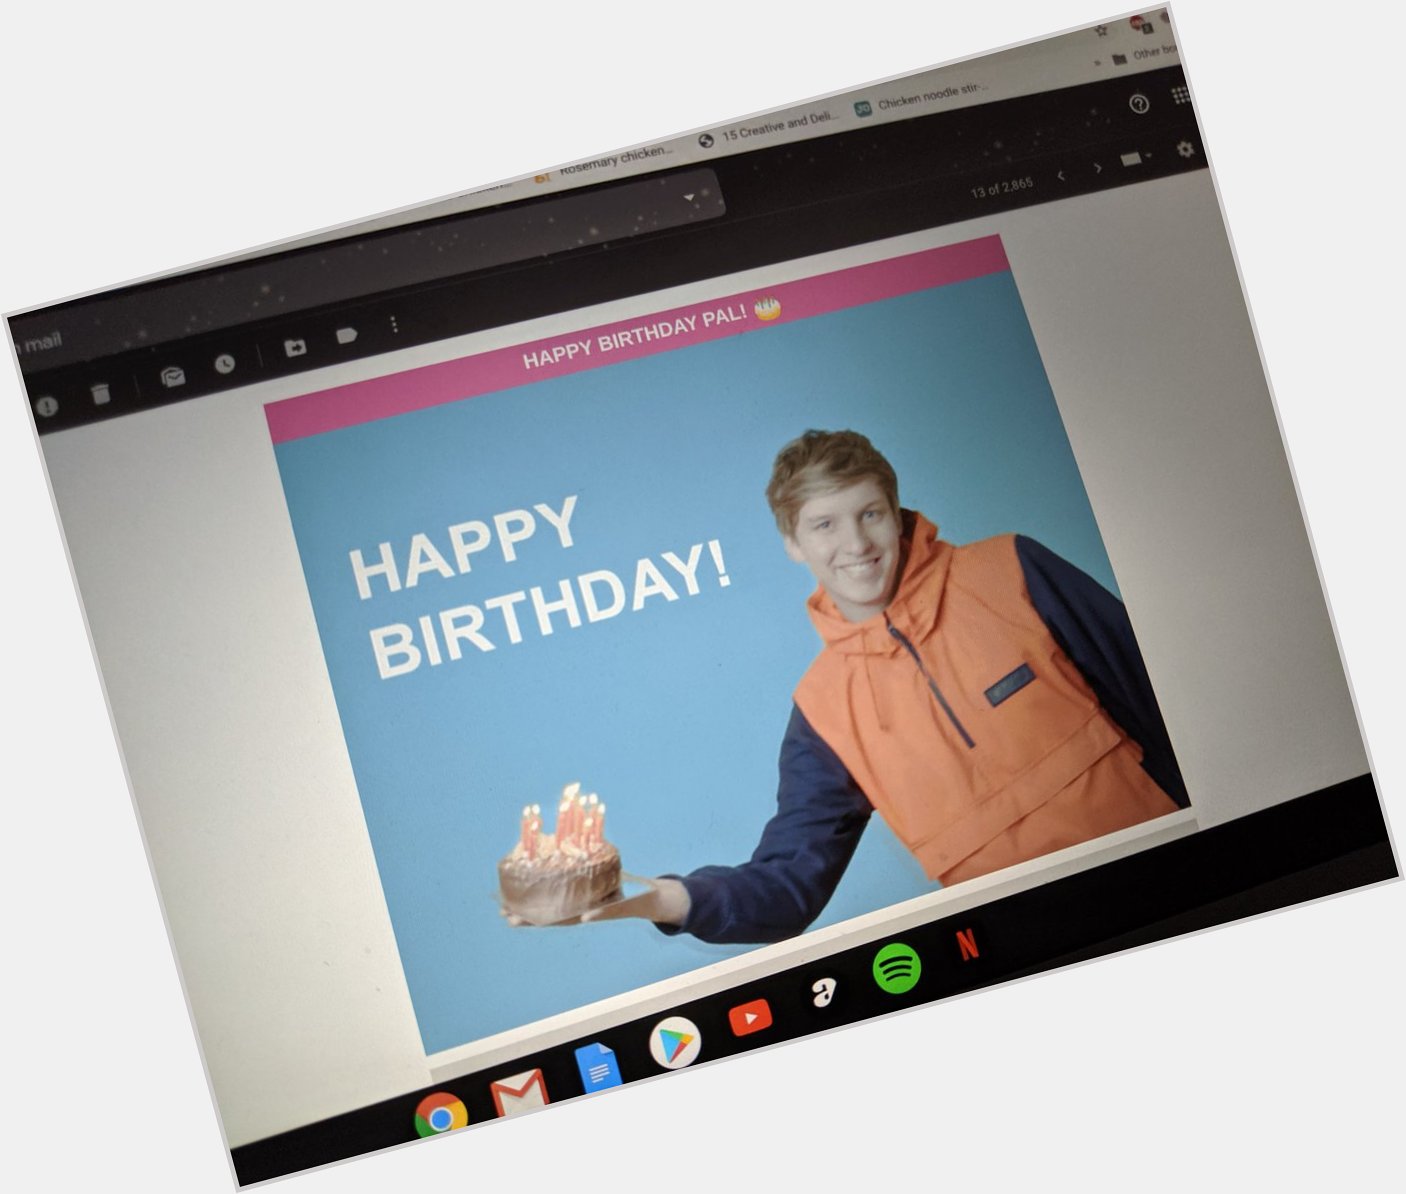 Hahaha just sorting through my emails and noticed a happy birthday email from amazing.   